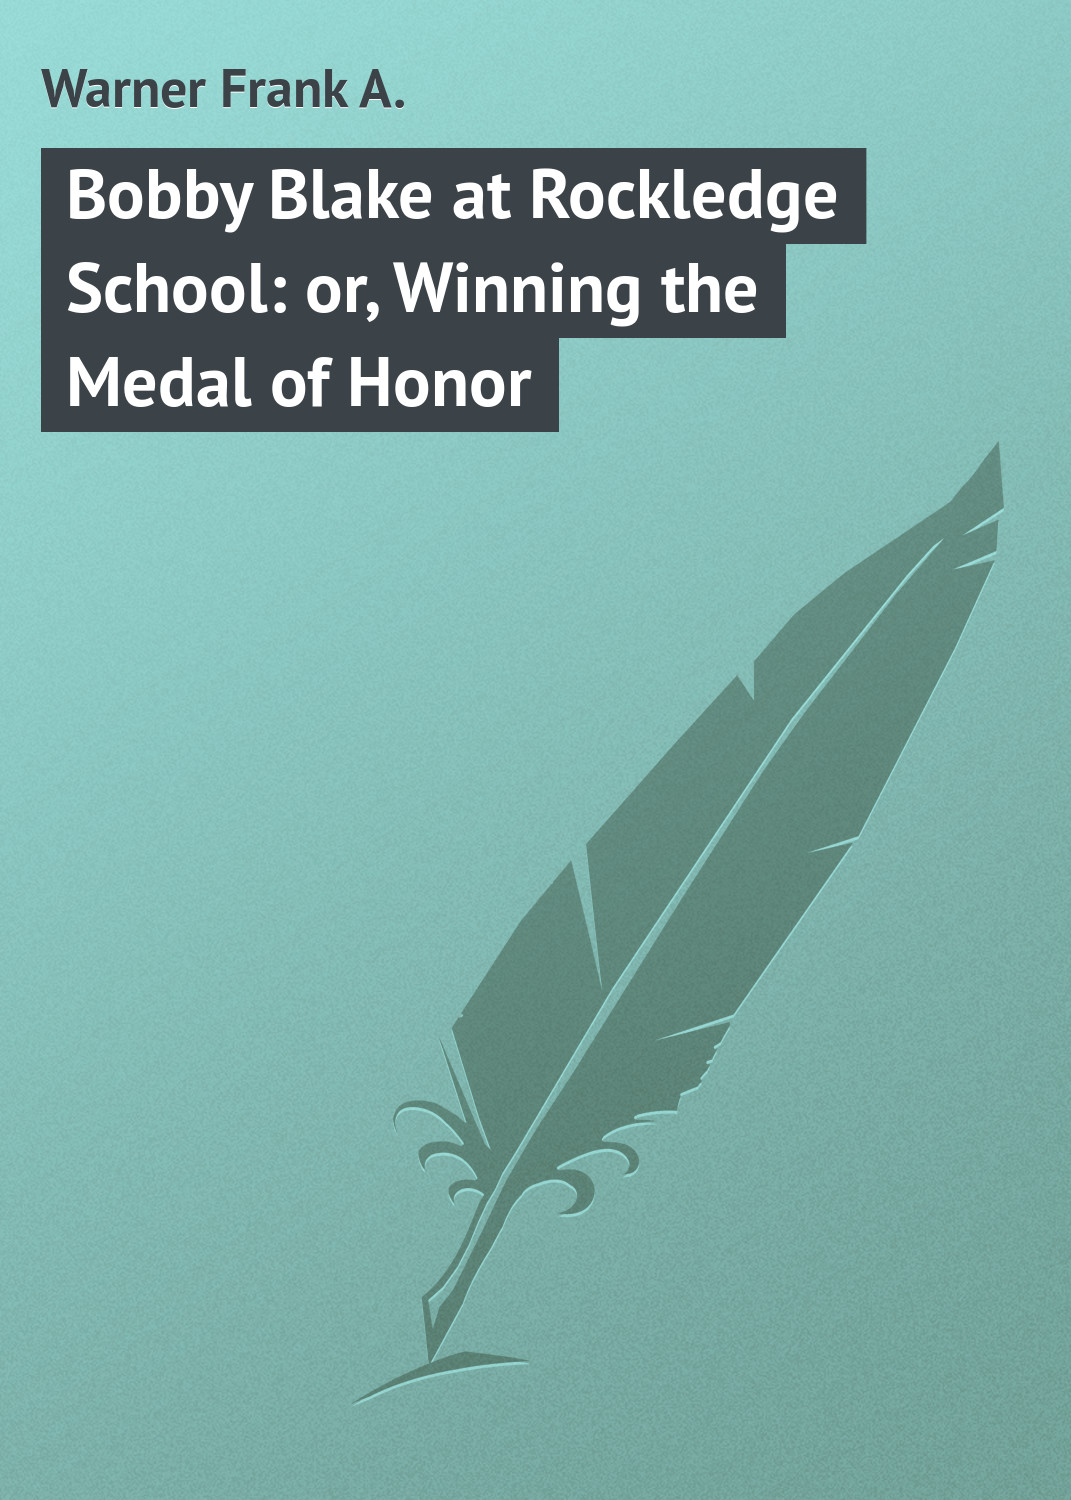 Bobby Blake at Rockledge School: or, Winning the Medal of Honor